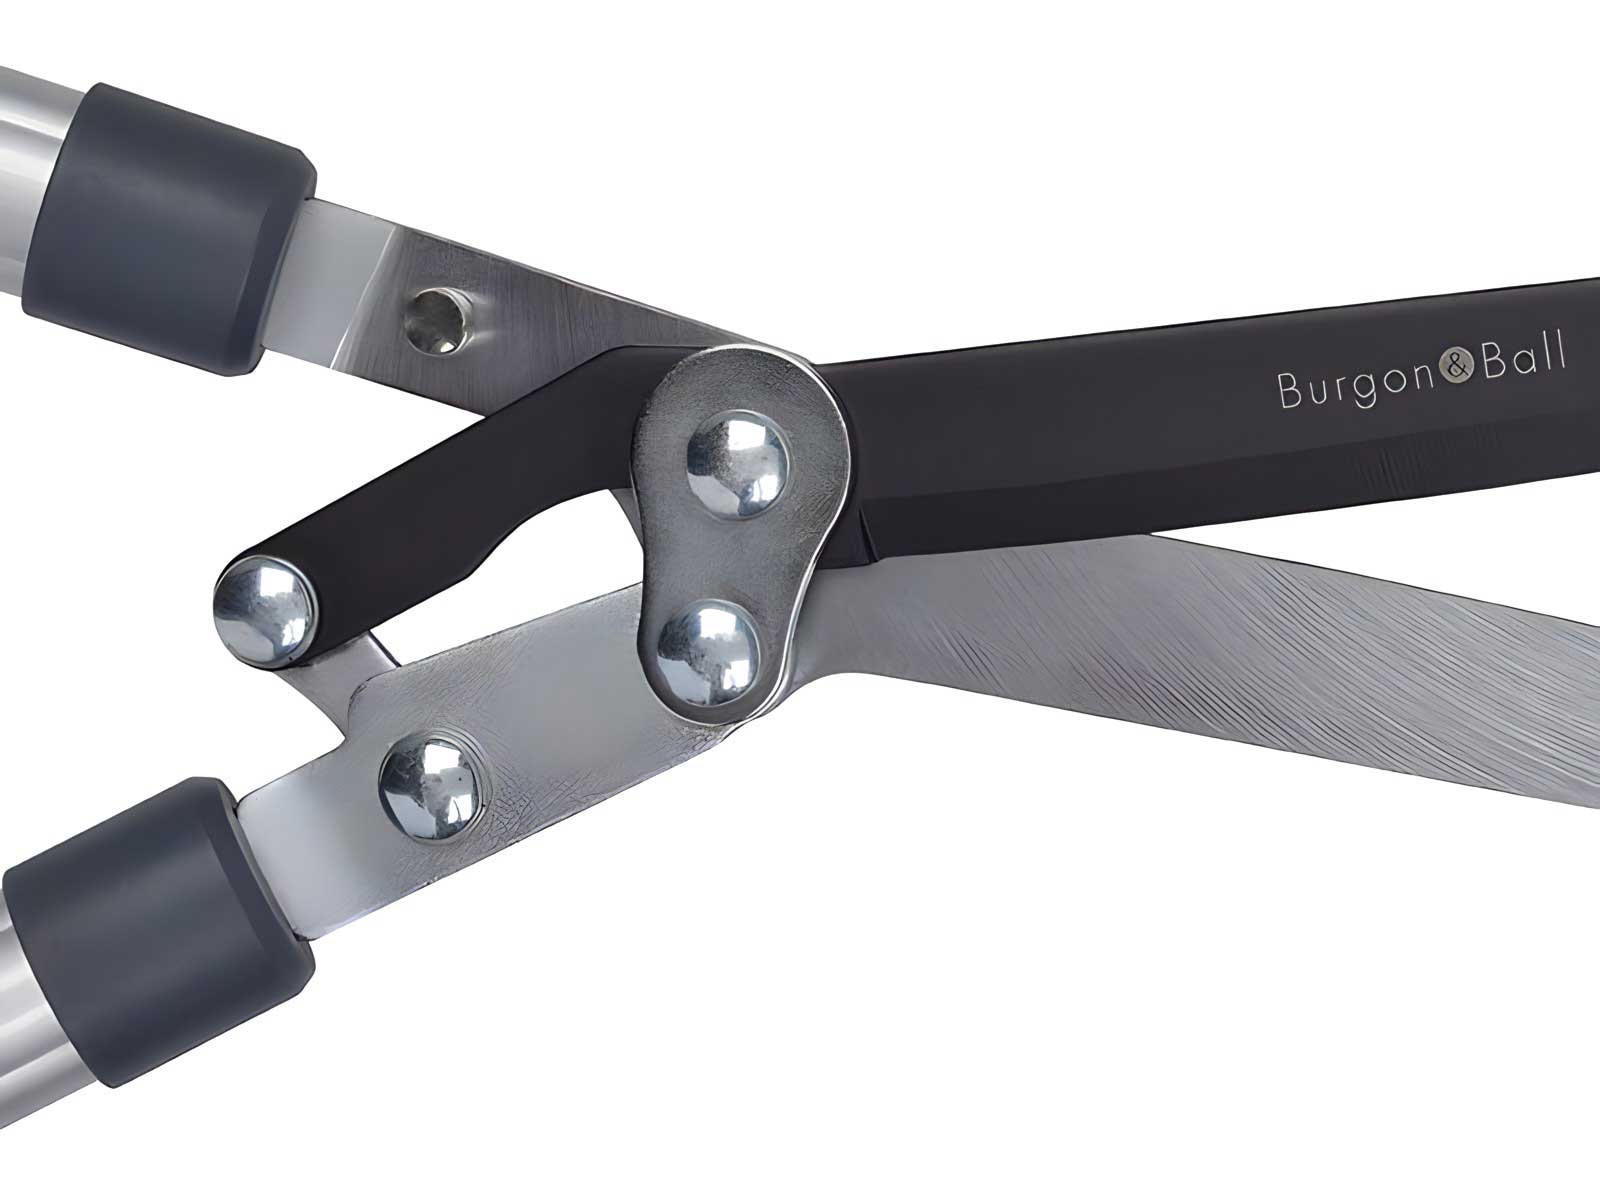 Burgon and Ball Hedge Shears have unique compound action that gives extra cutting power